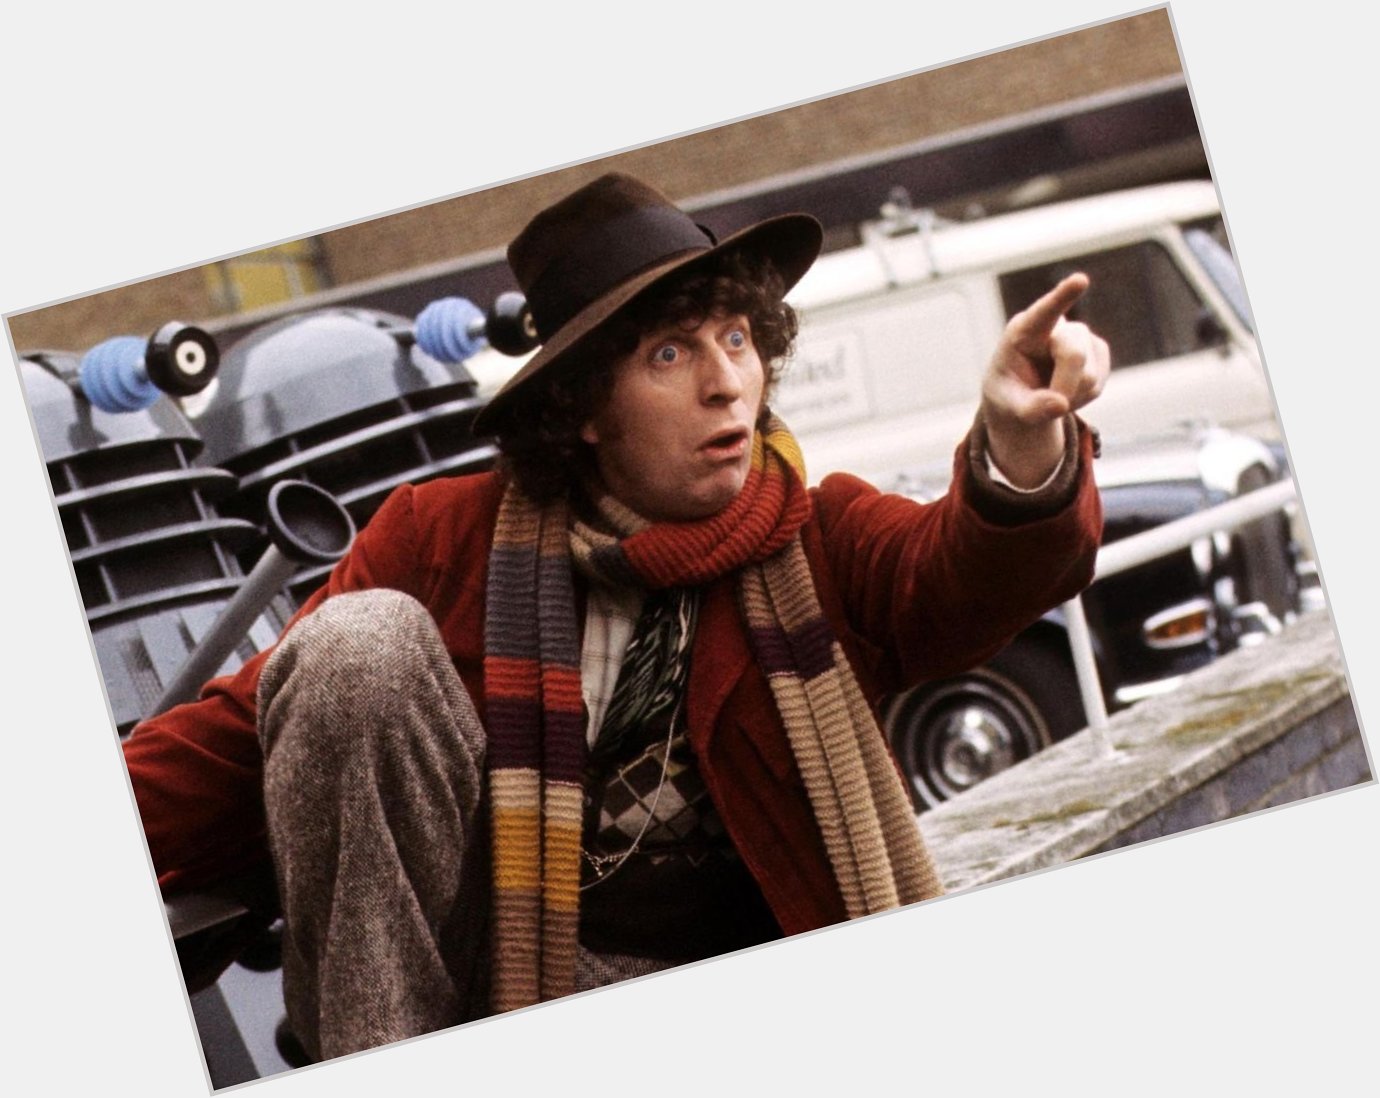 Happy Birthday to Tom Baker who played The Fourth Doctor. 